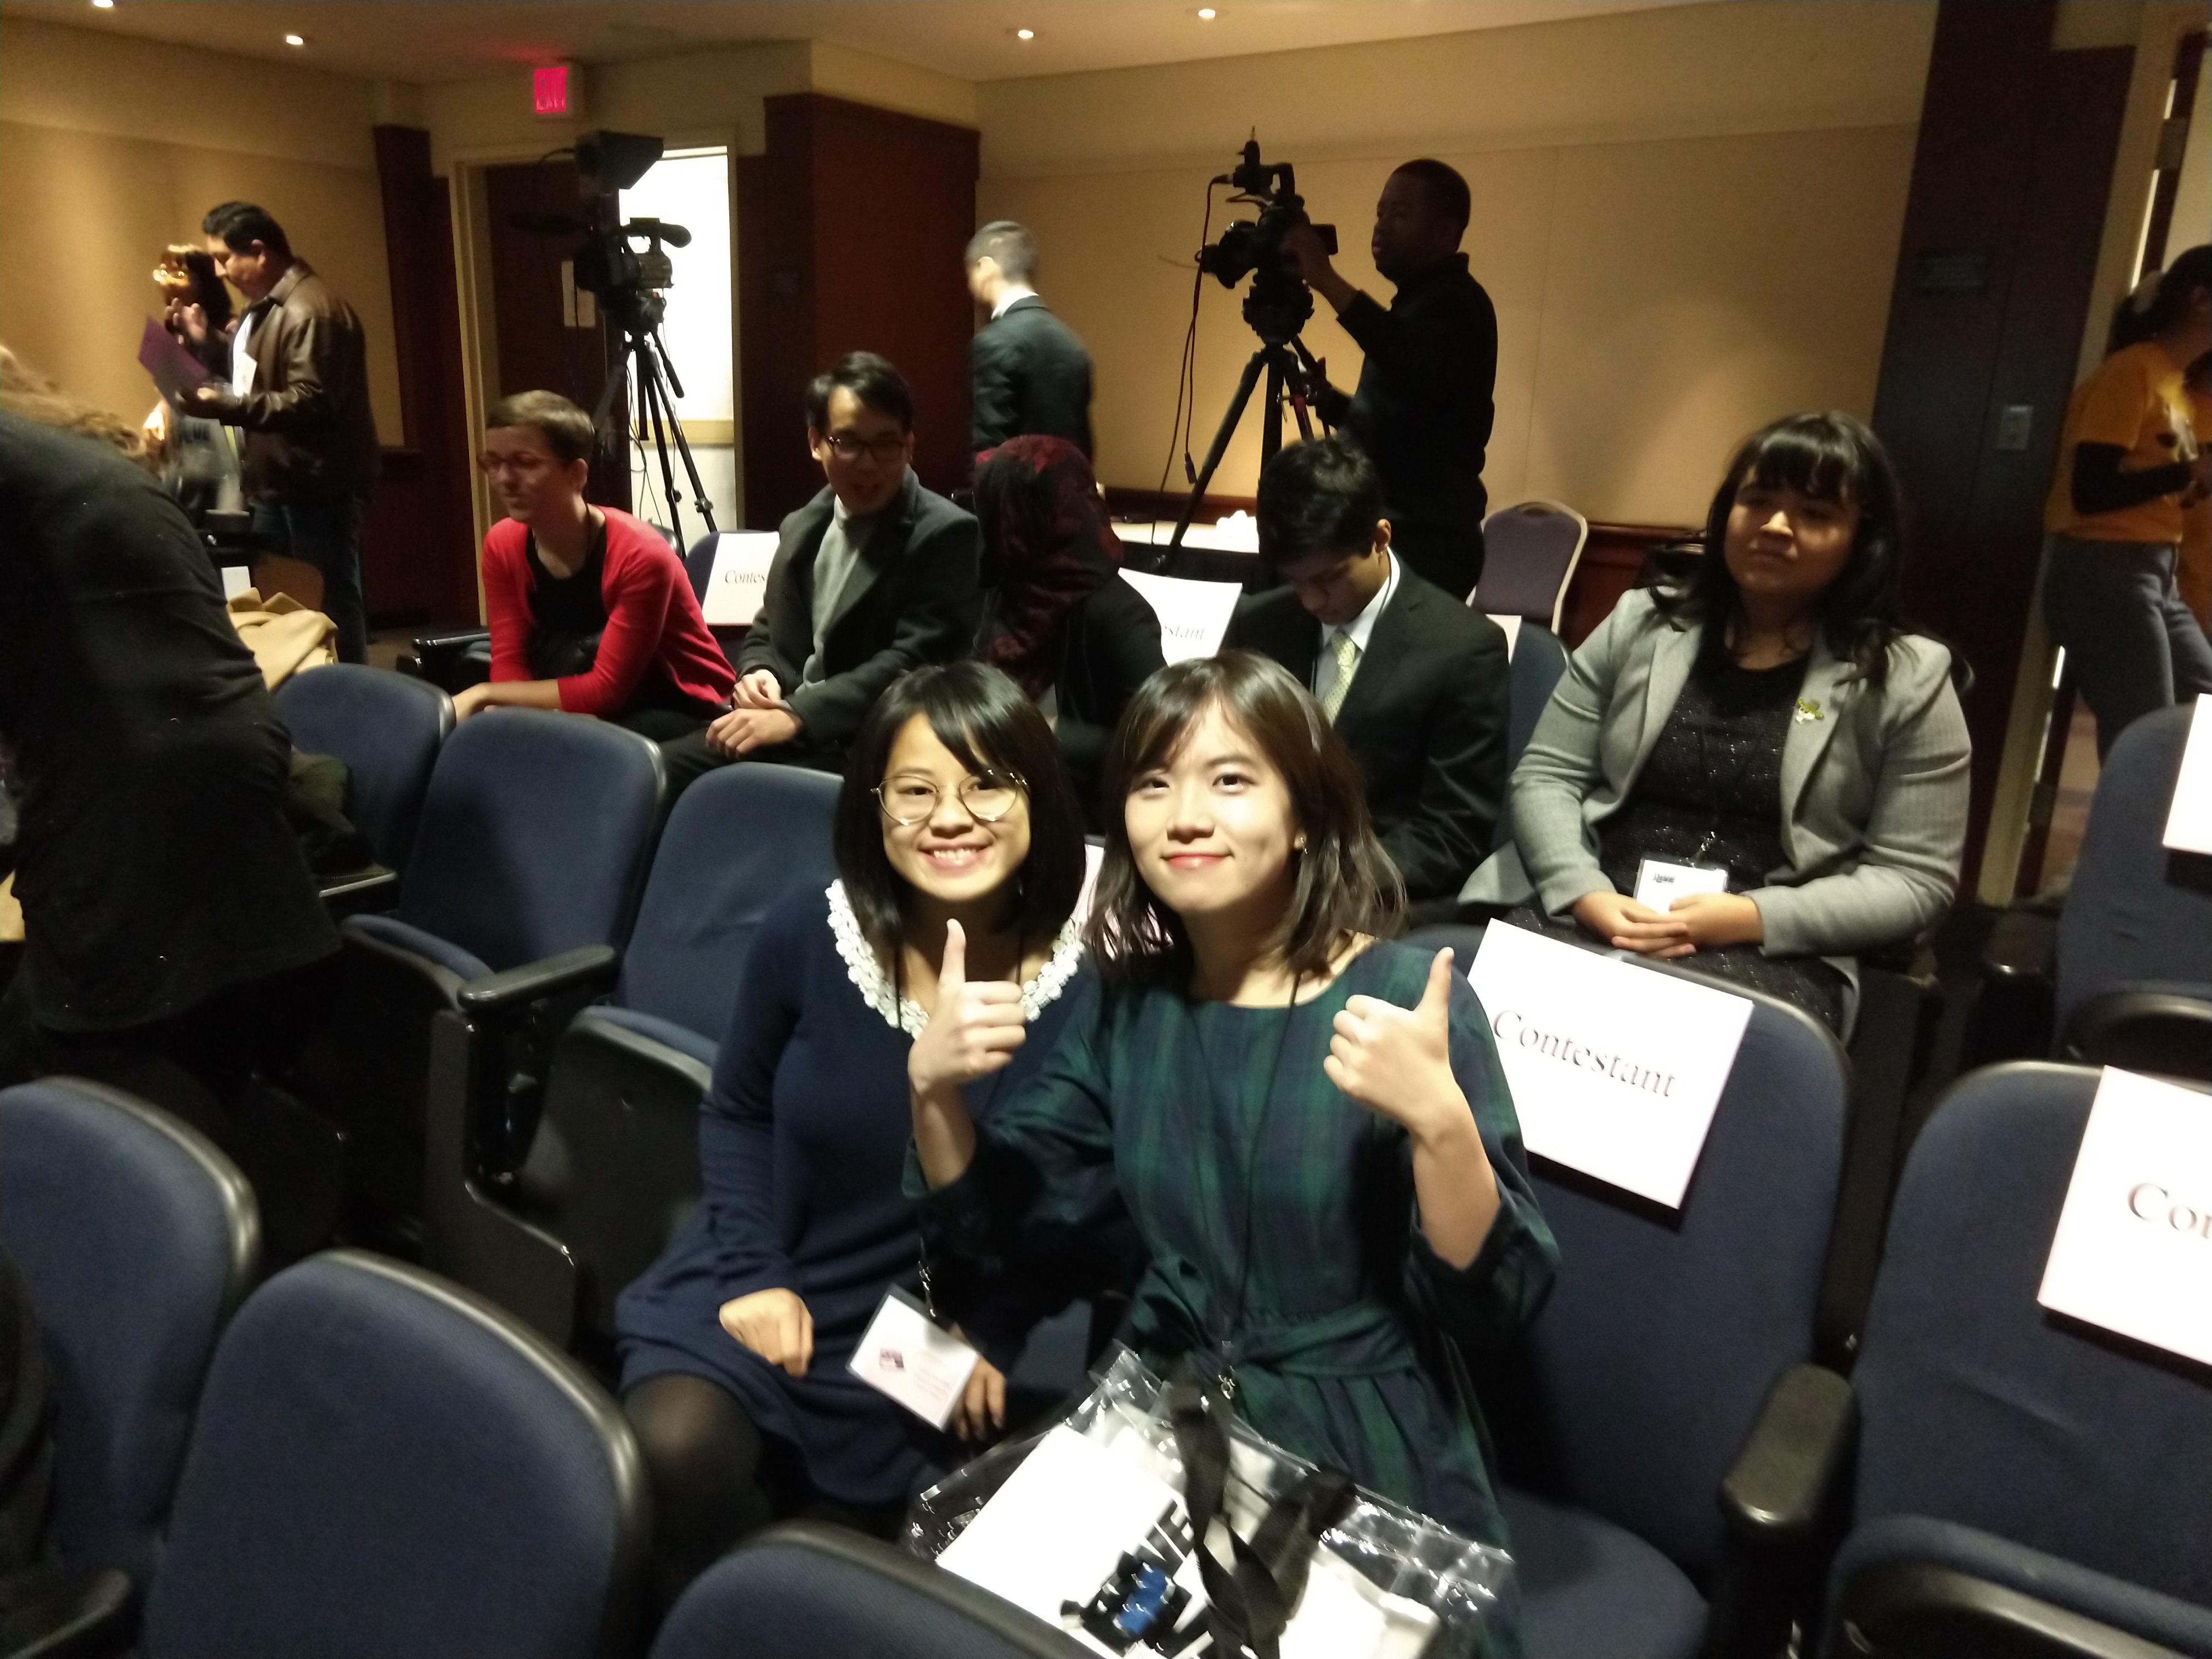 Barbara and Zhizou pose for a photo in their seats at the J.LIVE competition